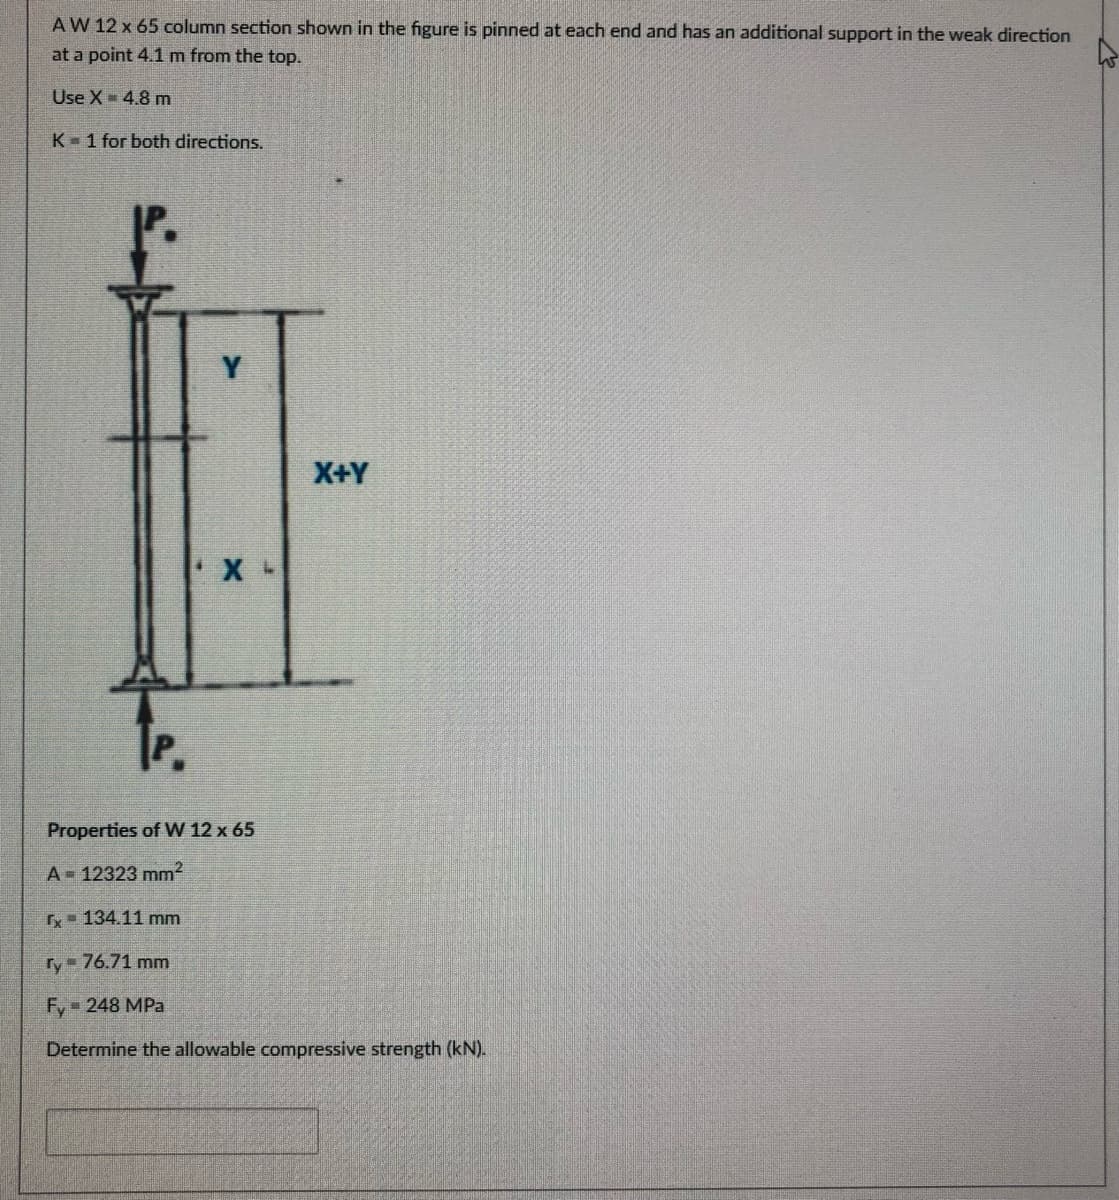 AW 12 x 65 column section shown in the figure is pinned at each end and has an additional support in the weak direction
at a point 4.1 m from the top.
Use X- 4.8 m
K 1 for both directions.
X+Y
Properties of W 12 x 65
A 12323 mm2
- 134.11 mm
ry 76.71 mm
Fy- 248 MPa
Determine the allowable compressive strength (kN).
